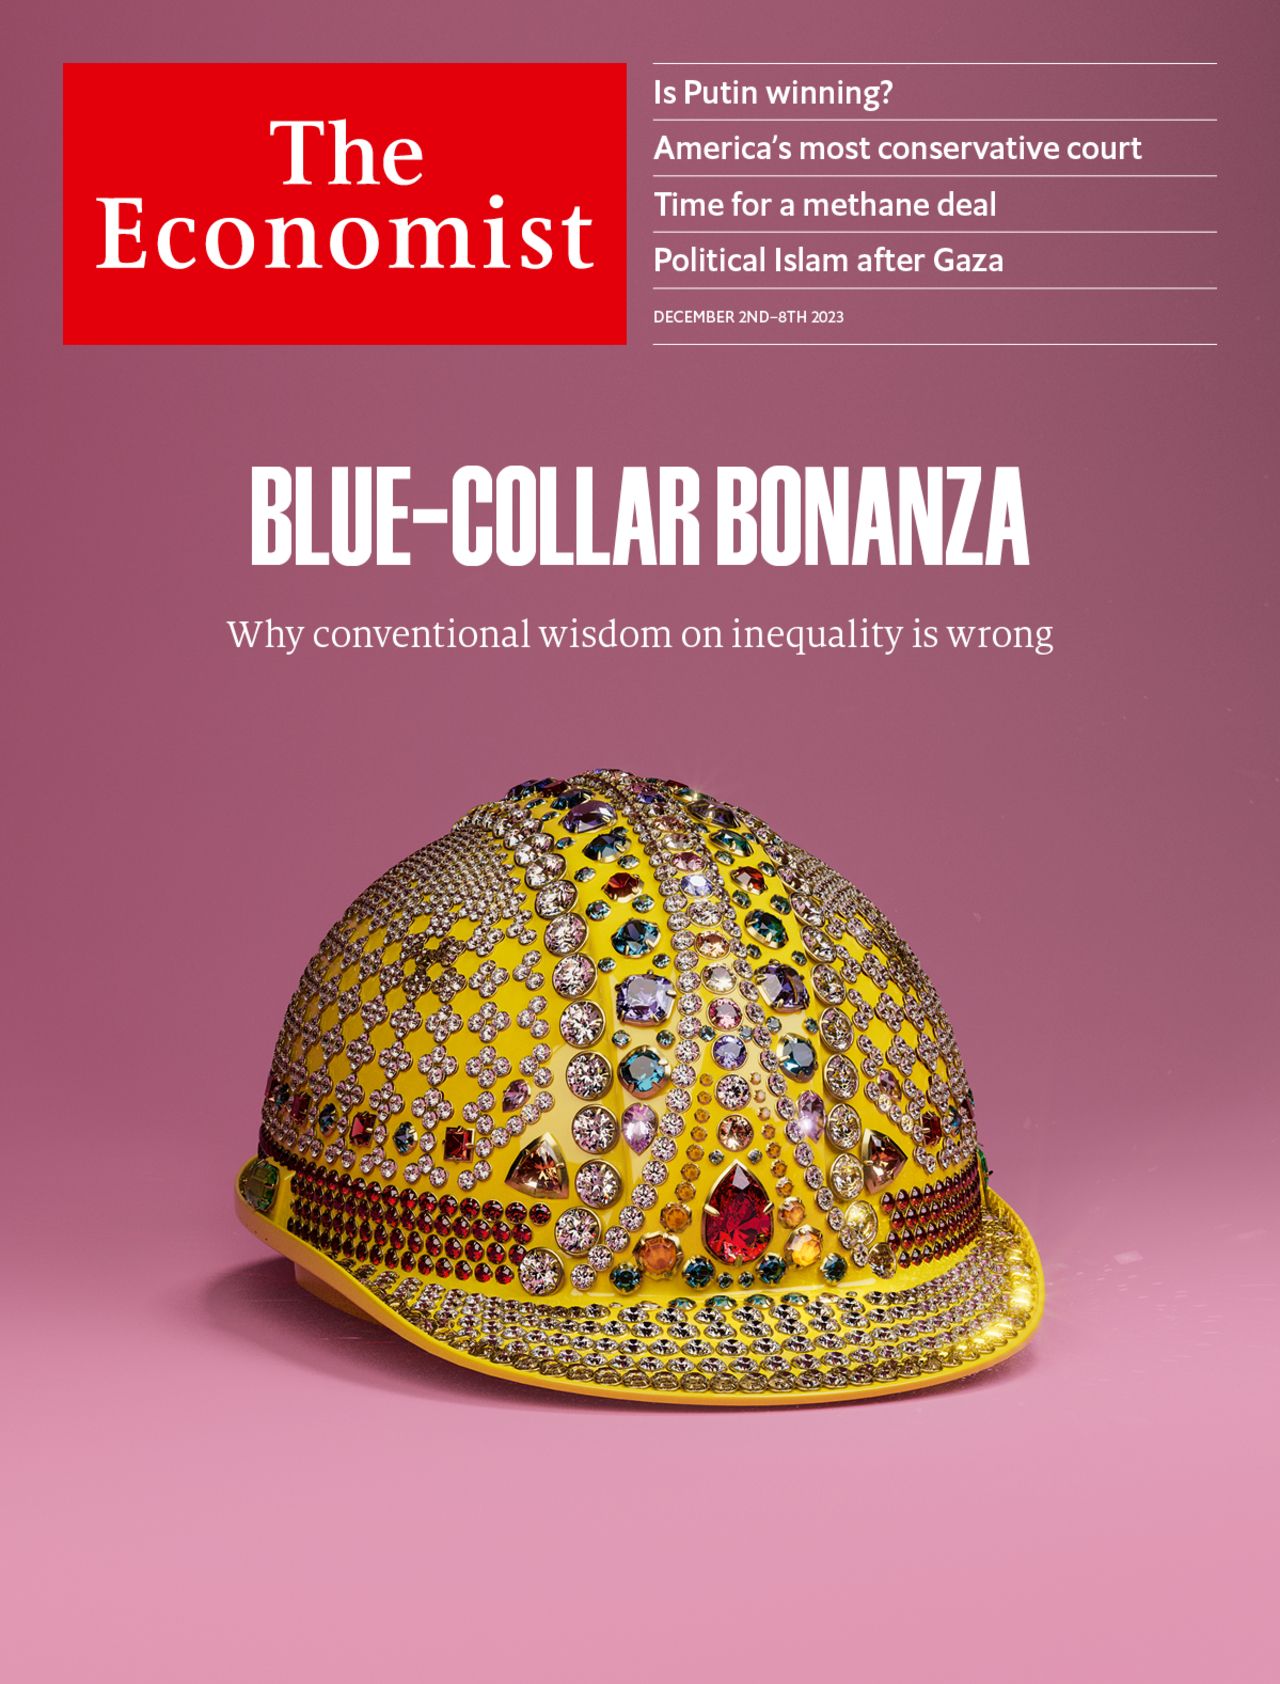 Blue-collar bonanza: Why conventional wisdom on inequality is wrong